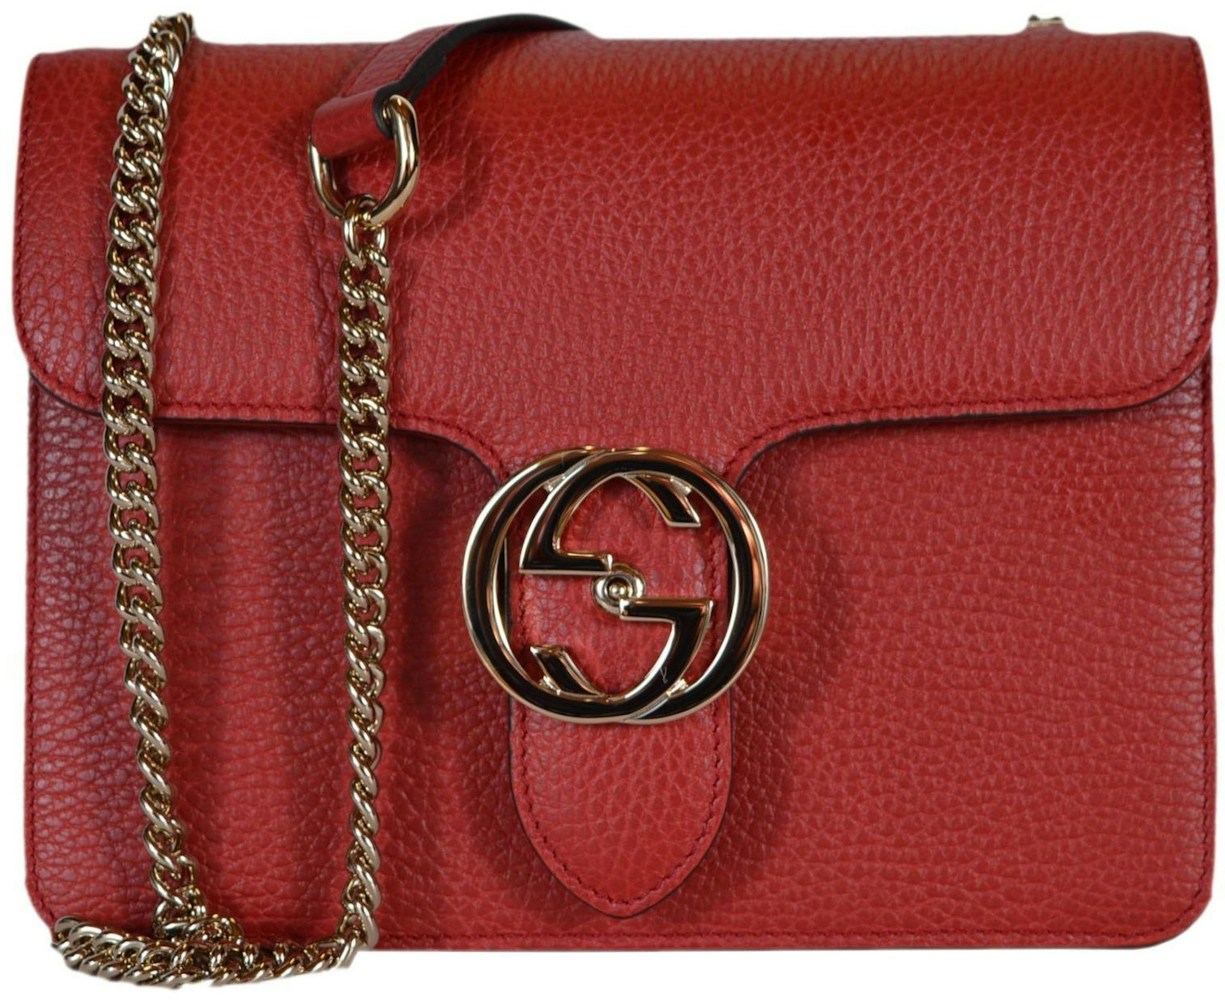 Gucci Interlocking G Shoulder Bag Small Red In Pebbled Caflskin With Gold Tone